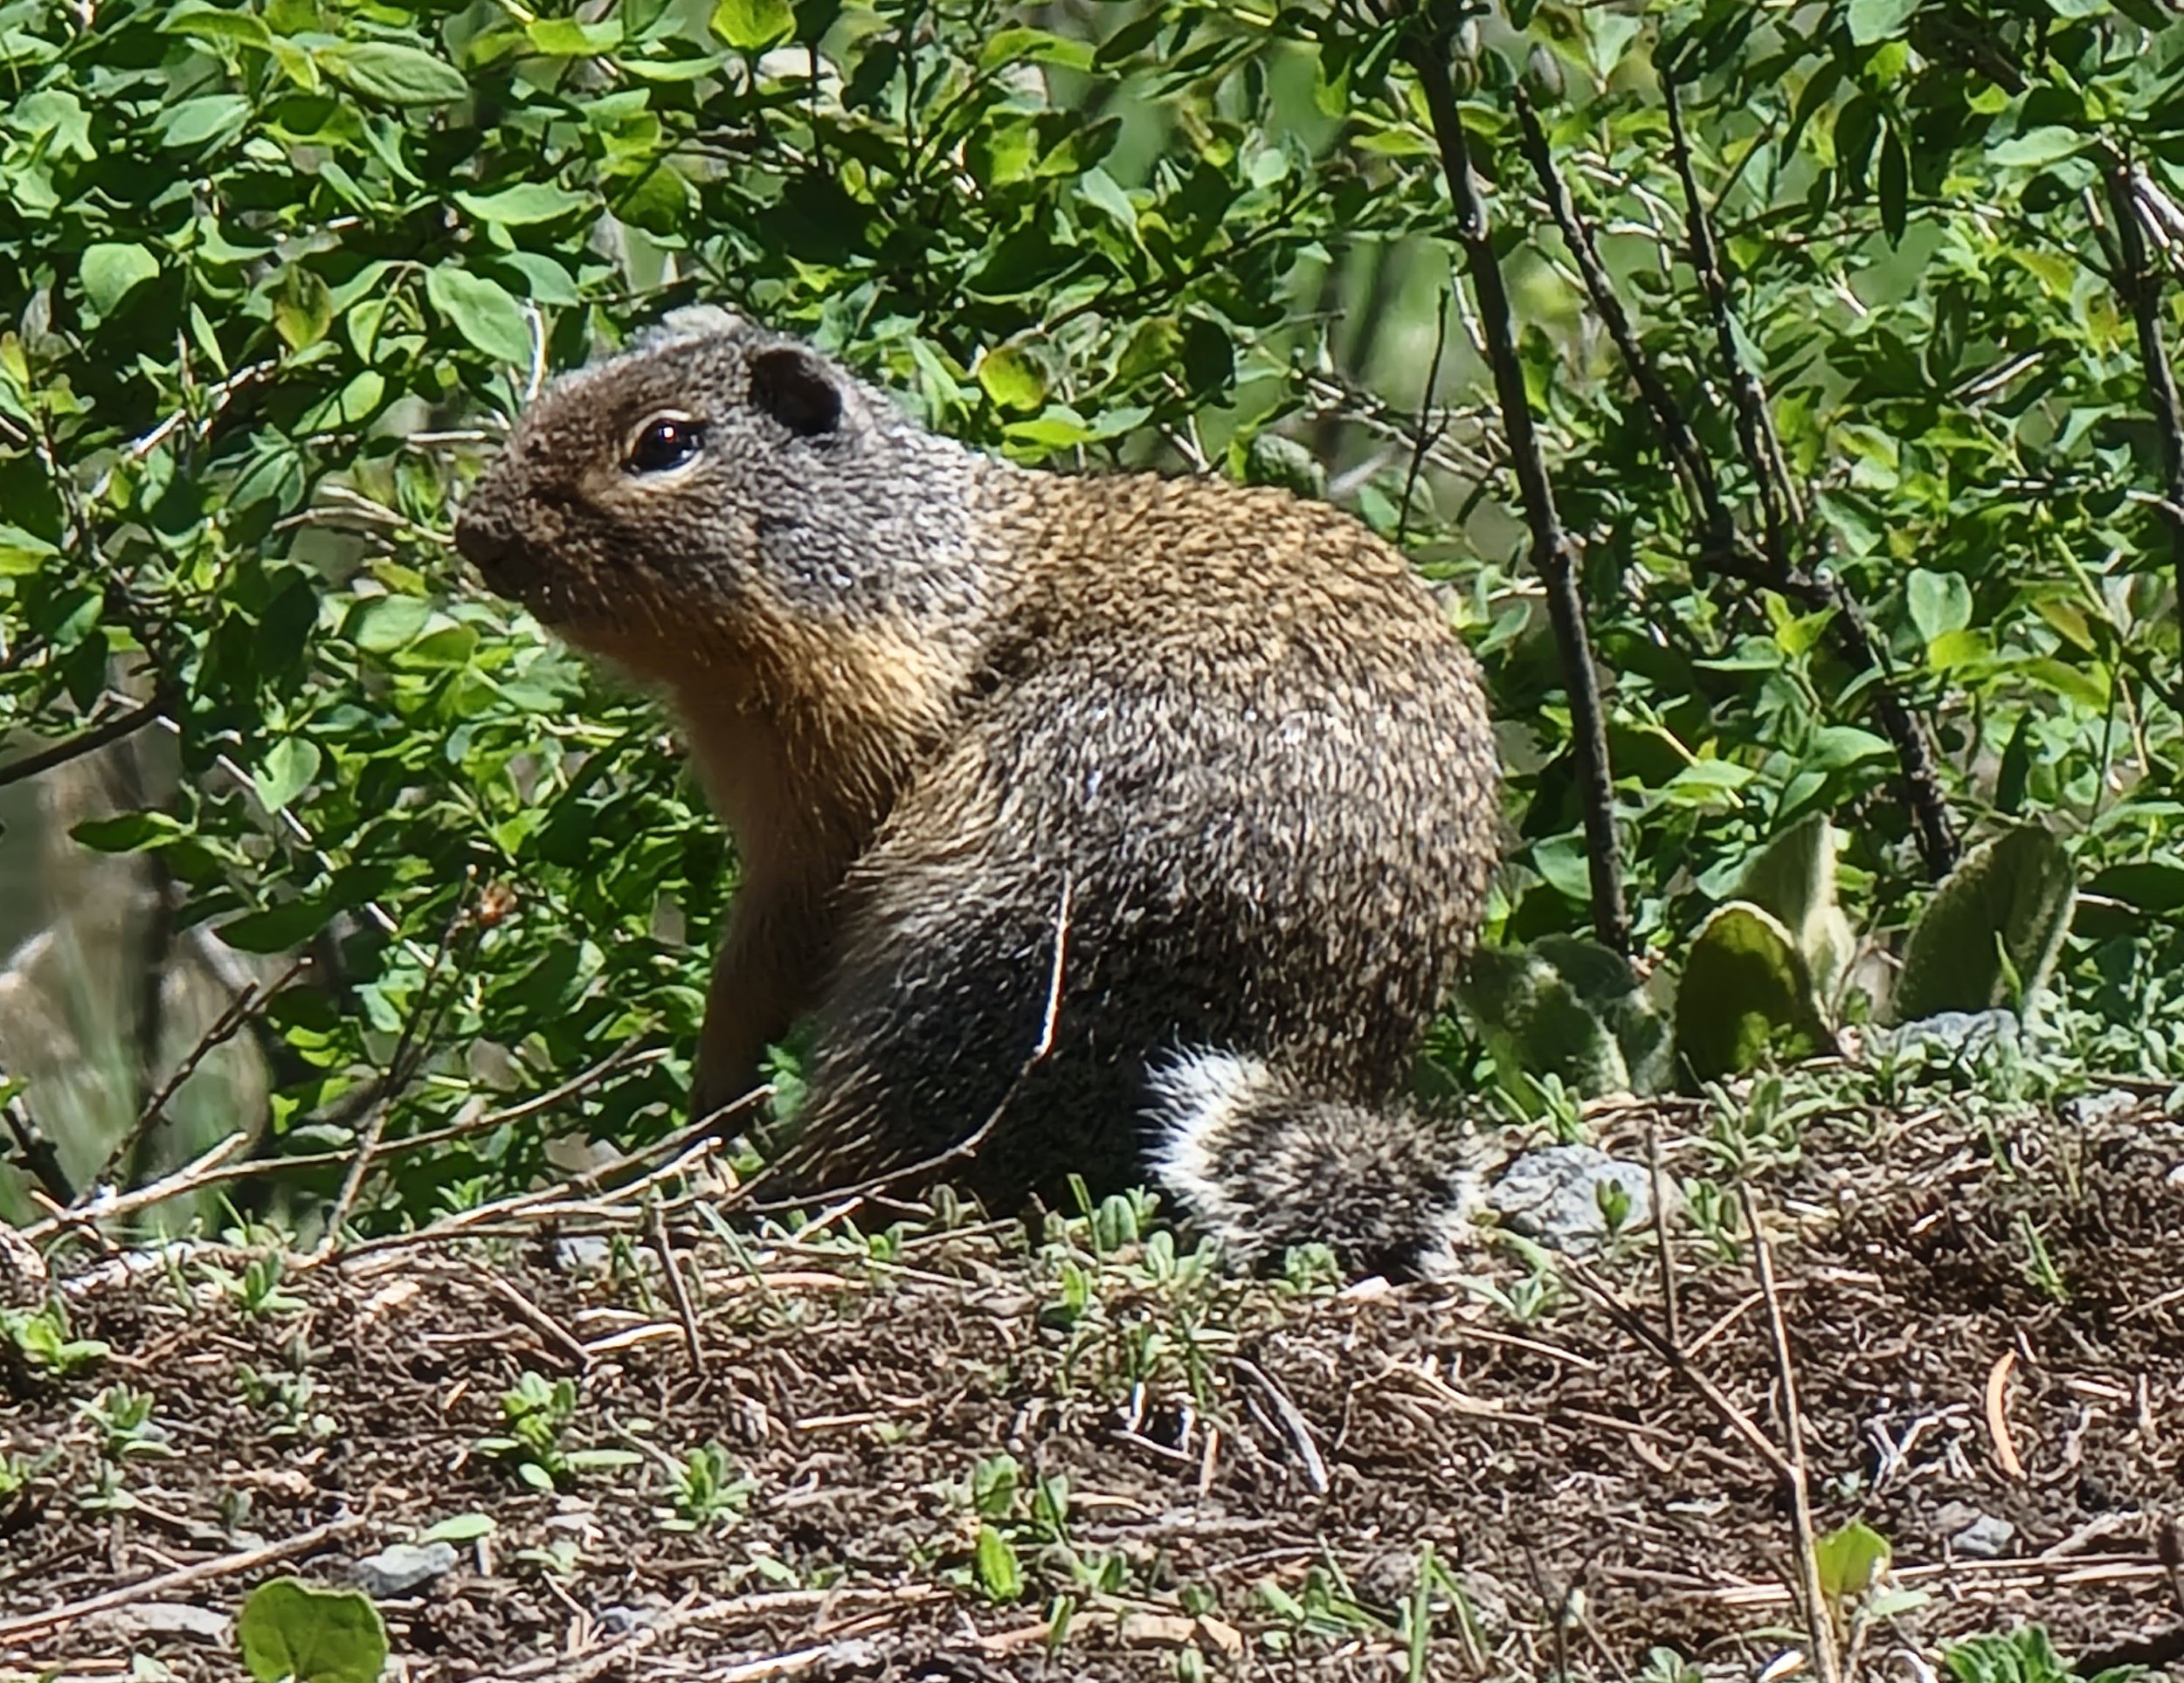 Columbian Ground Squirrel. Check out the picture quality compared to last year.